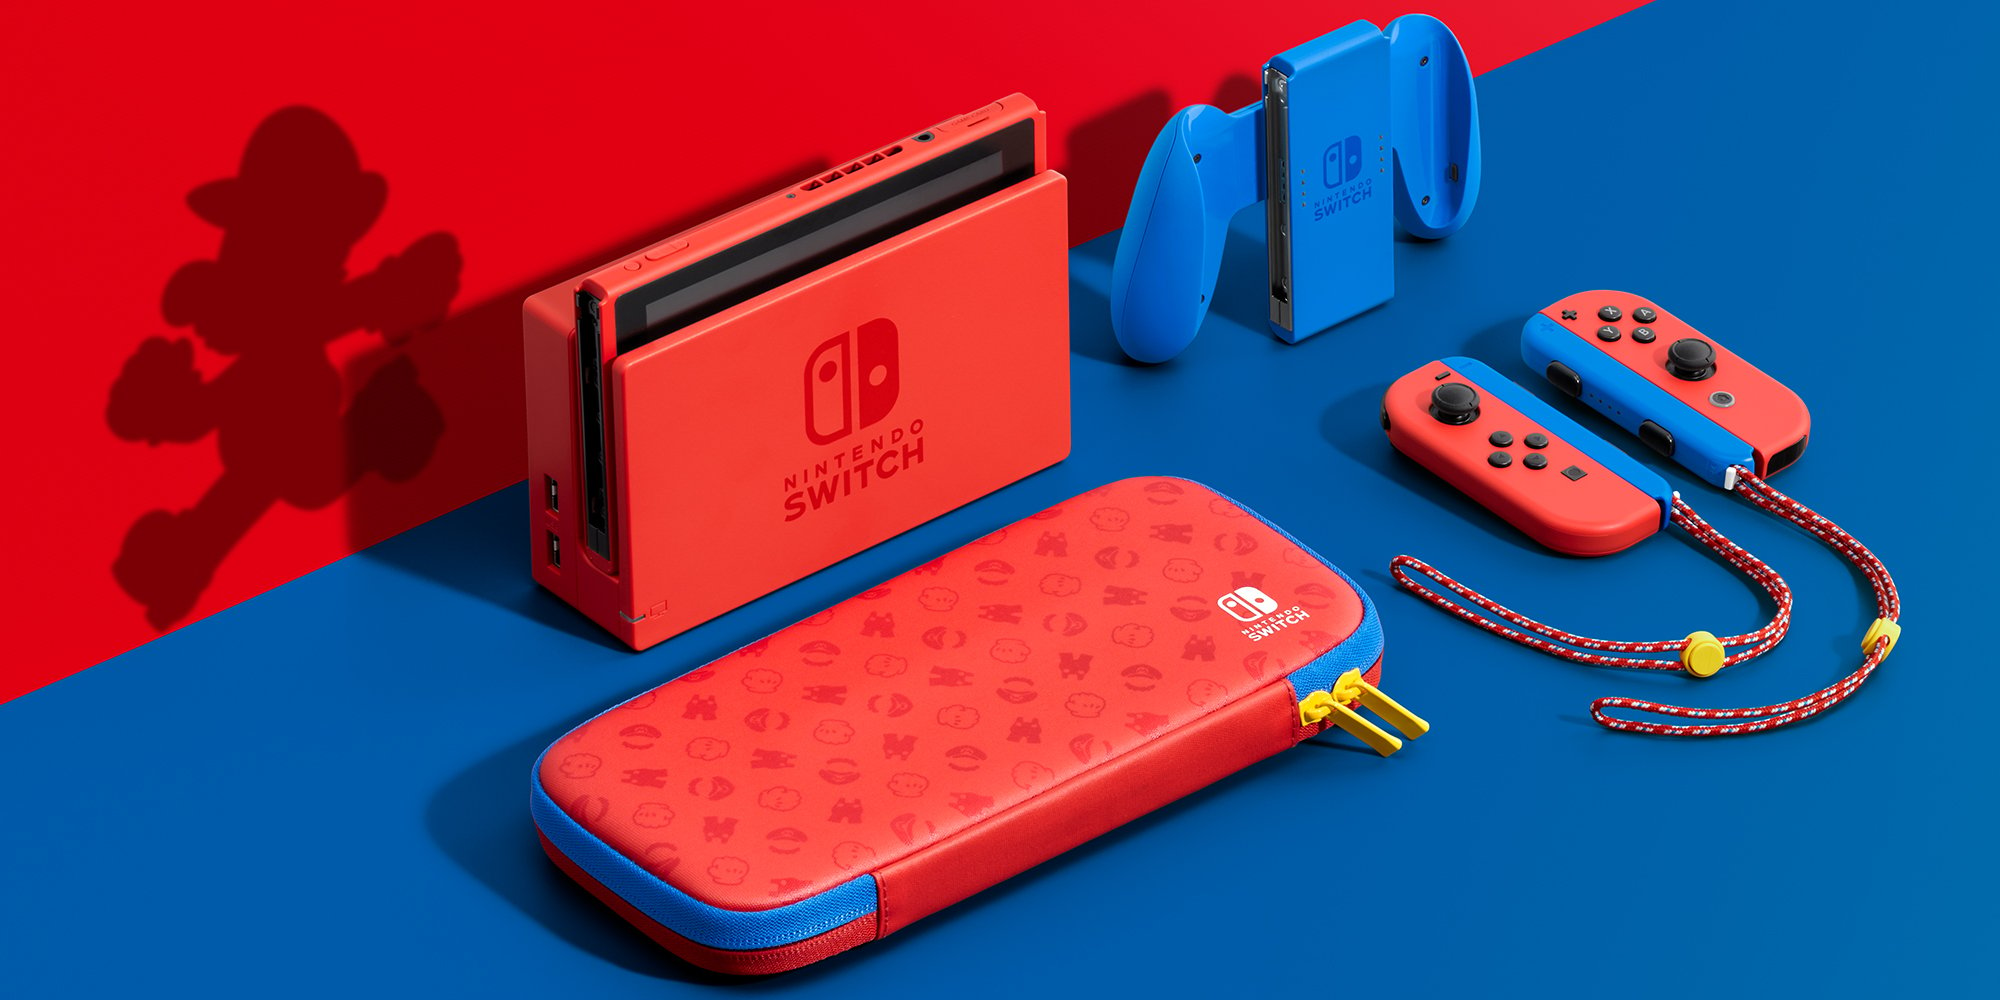 Nintendo's new Mario edition Switch is the console's first colour change